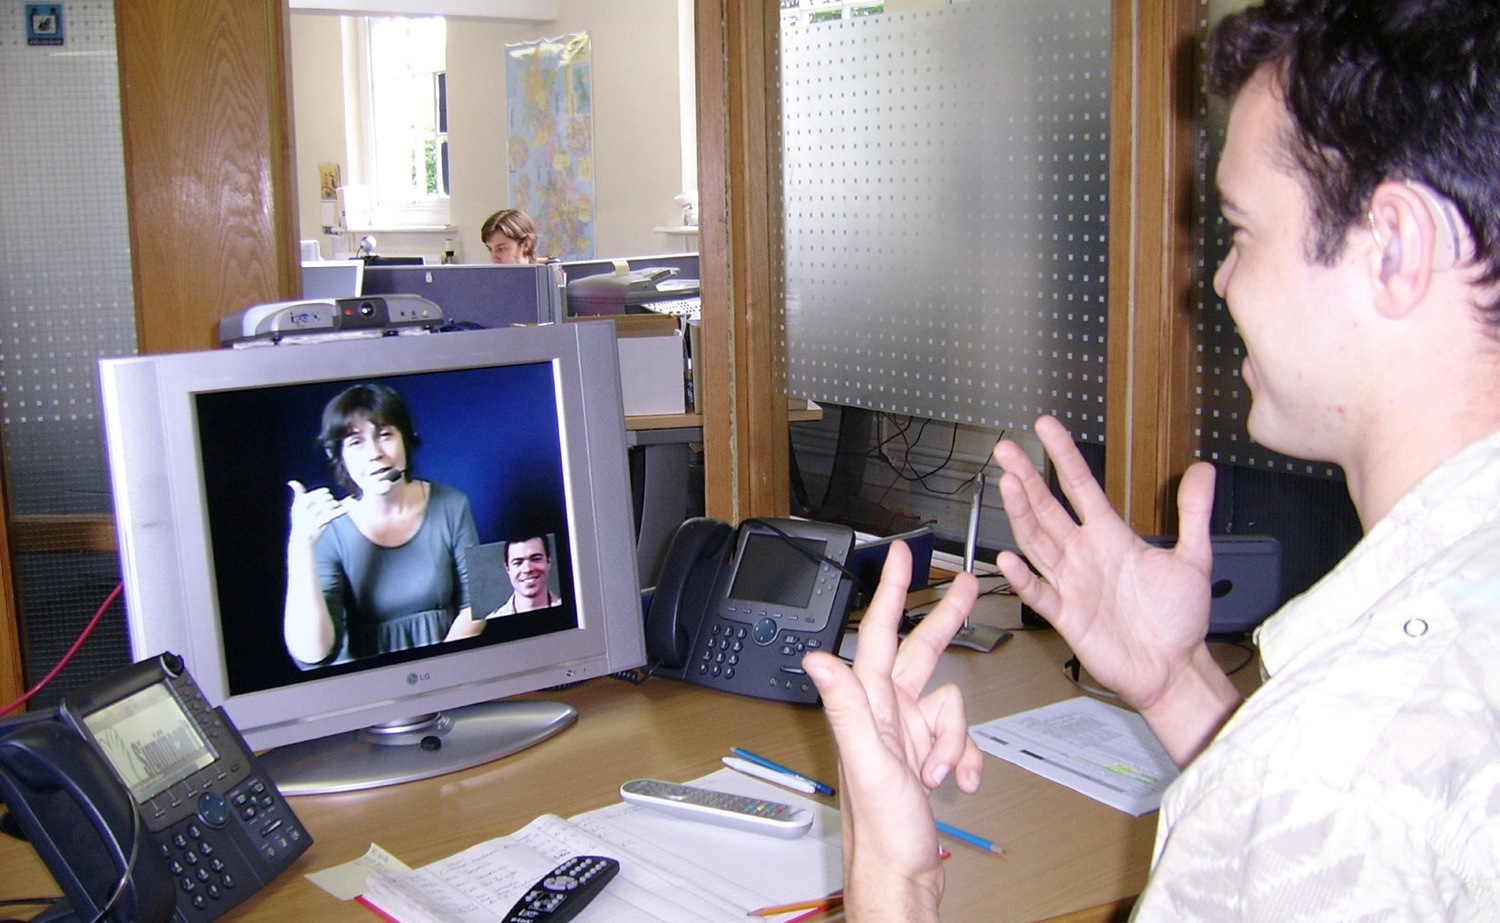 Deaf or HoH person at his workplace using a Video Relay Service to communicate with a hearing person via a Video Interpreter and sign language SVCC 2007 Brigitte SLI Mark